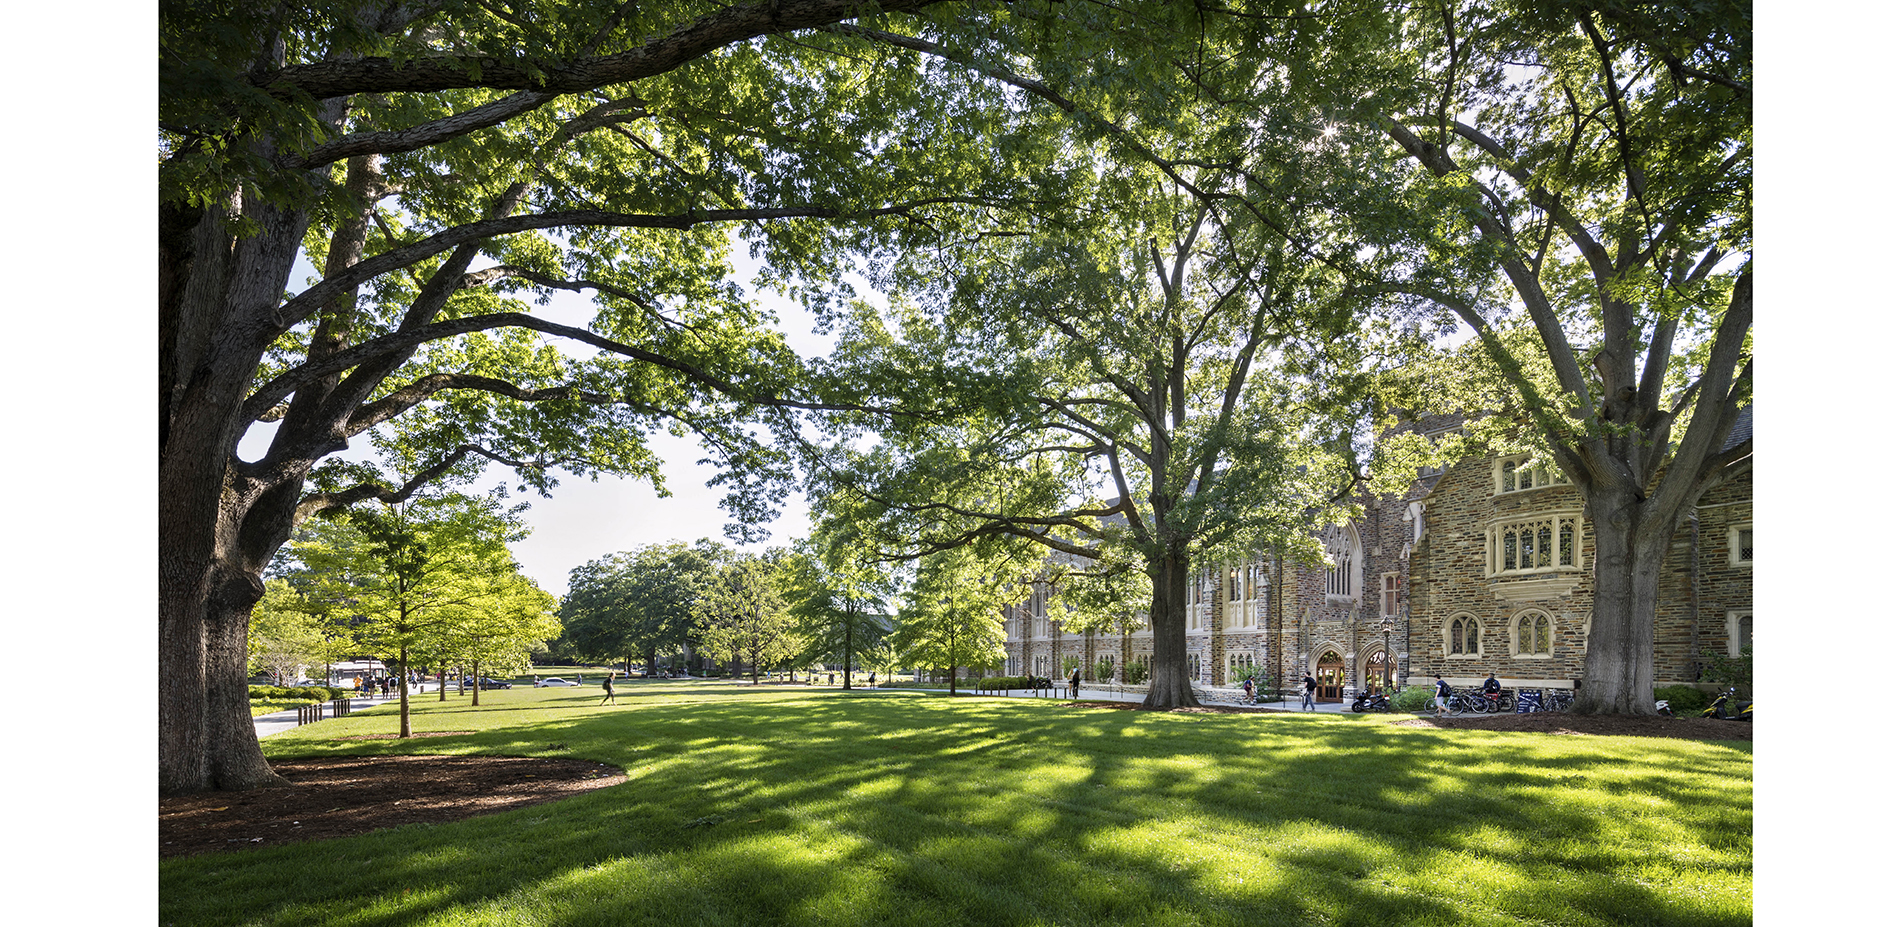 The character-defining Oaks of Abele Quad were in decline. Healthy soils, subtle re-grading, and improved drainage renew the lawn and invigorate the t…